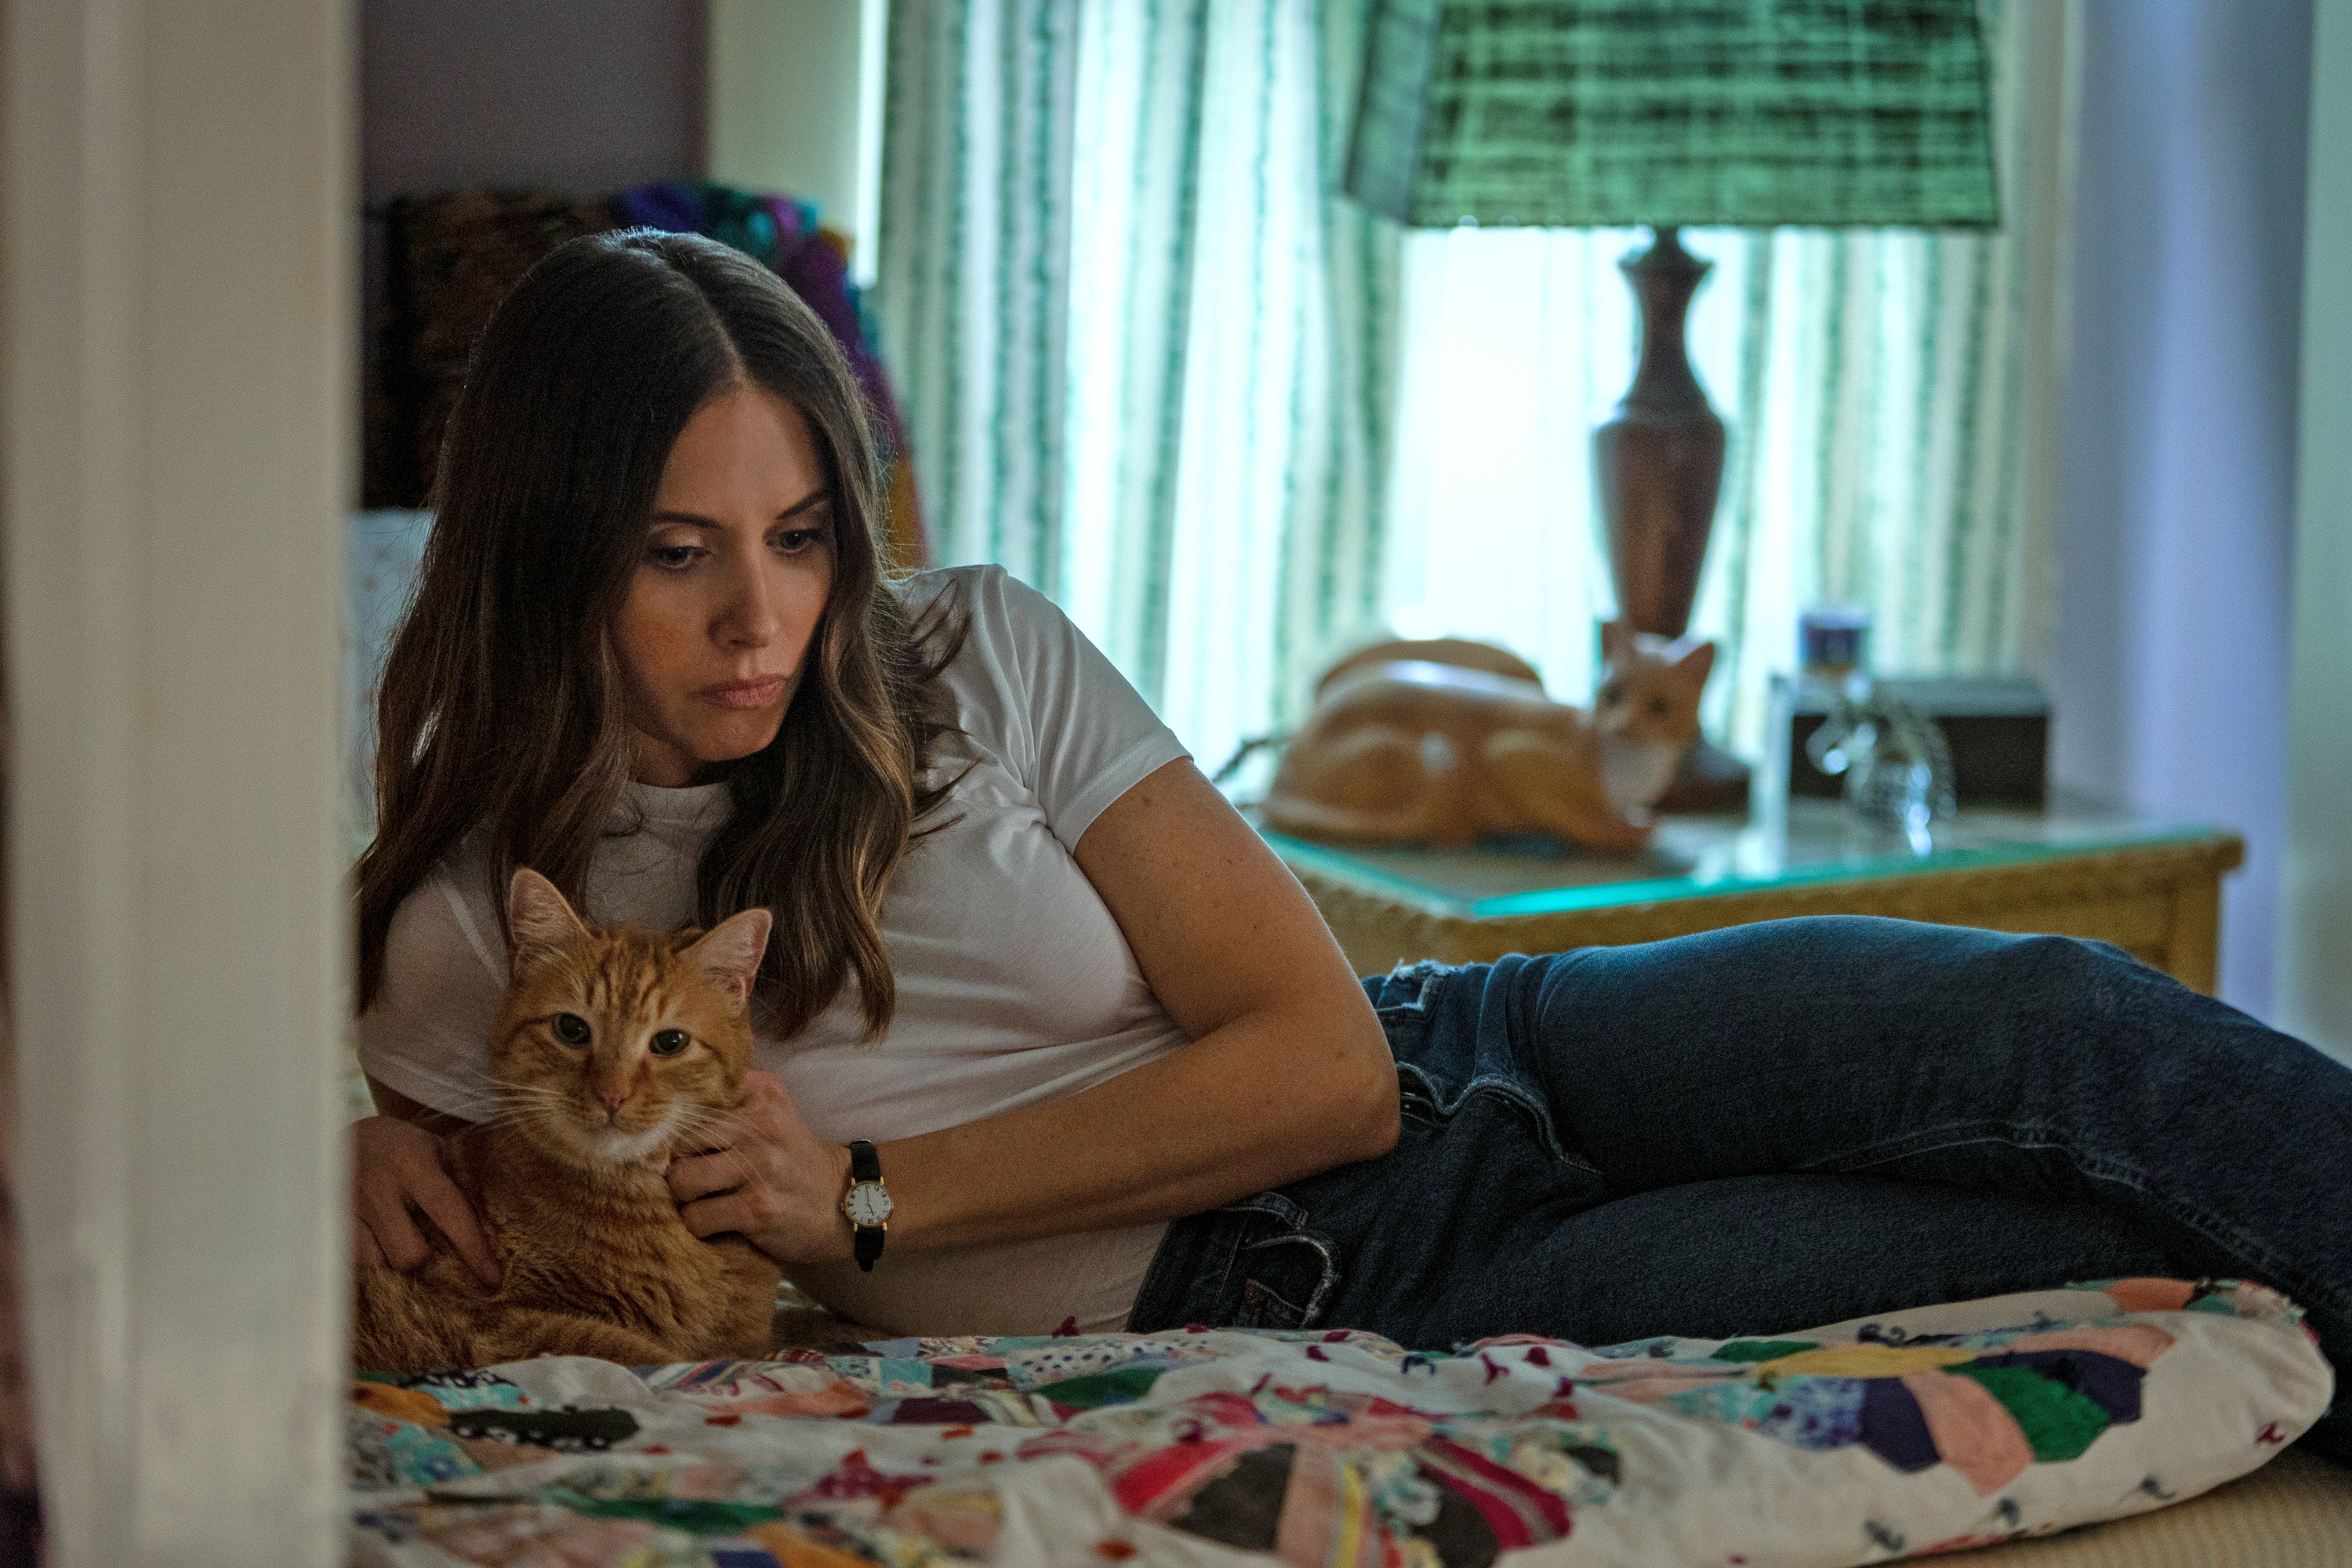 Litel San And Moom Xxx Sax - Five things to stream this weekend: Alison Brie subverts the romcom, plus  Babylon burns Hollywood down - The Globe and Mail